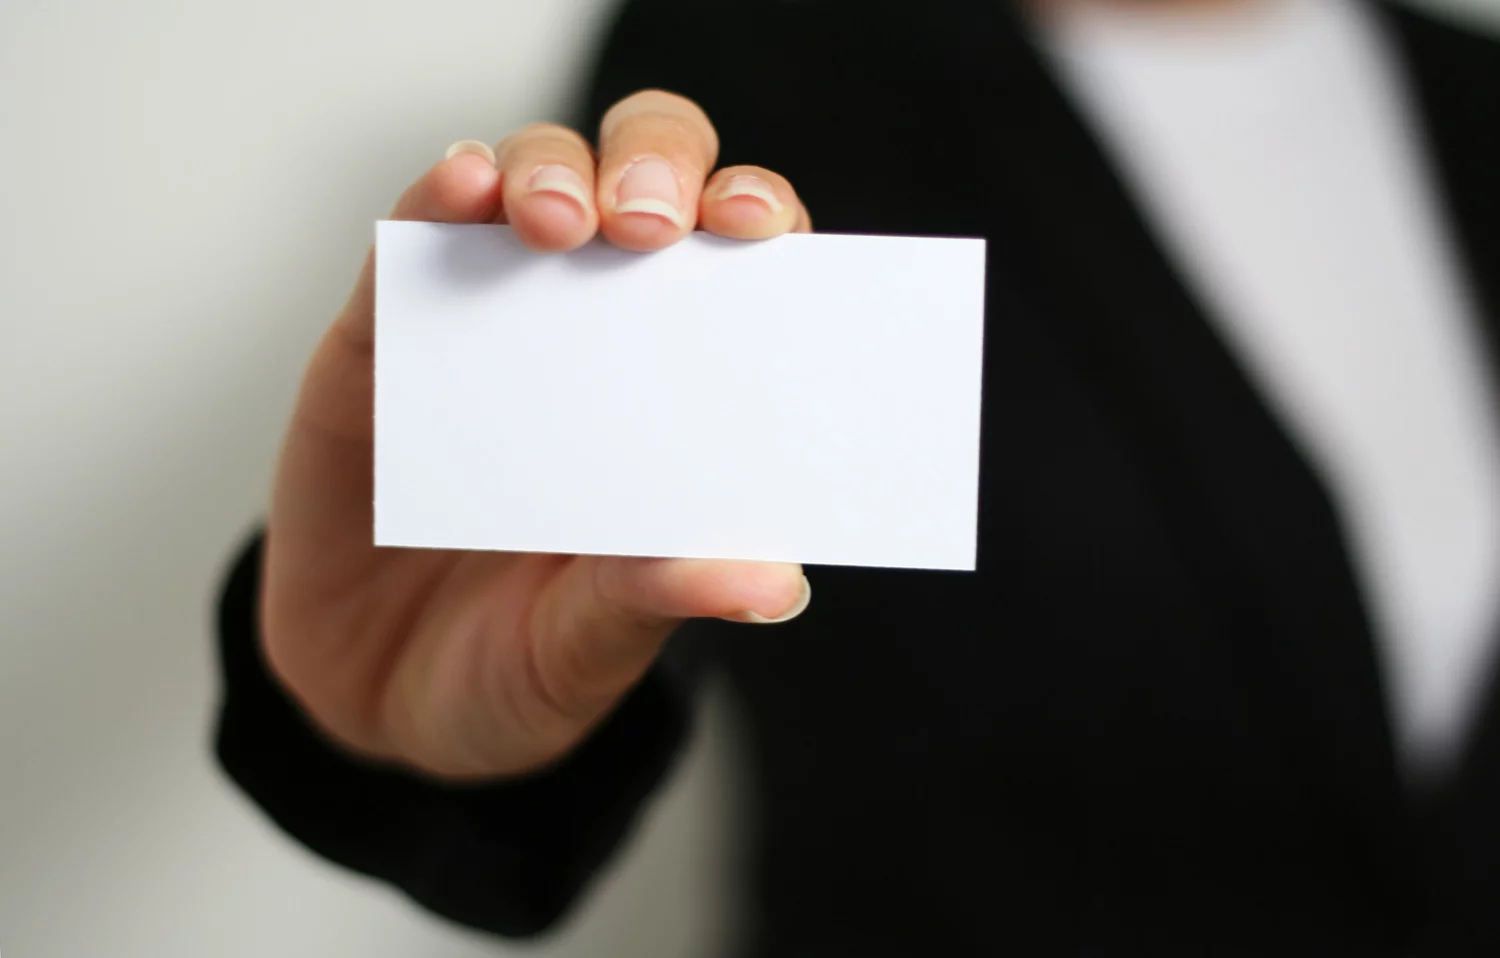 Man showing a white card